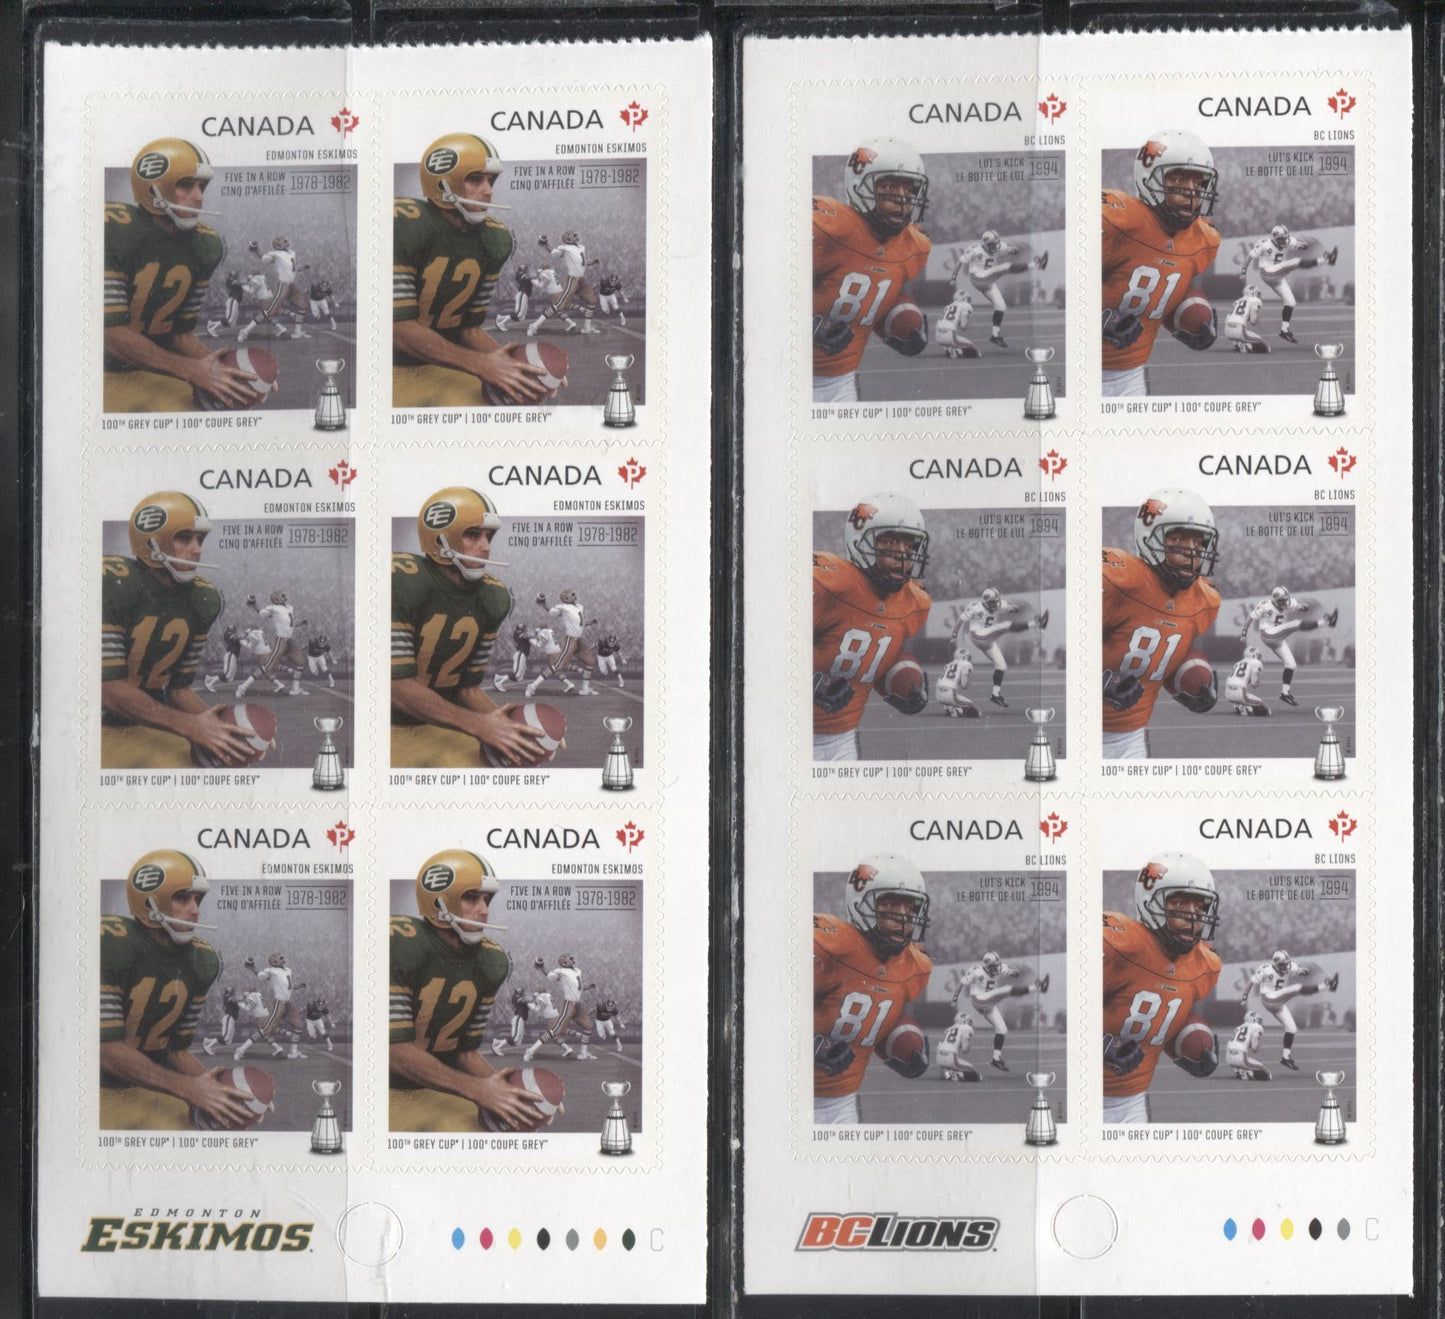 Lot 78 Canada #2568-2570 2012 100th Grey Cup Game Issue, VFNH Booklet Panes of 6 of the Grey Cup, BC Lions and Edmonton Eskinos on LF TRC Paper